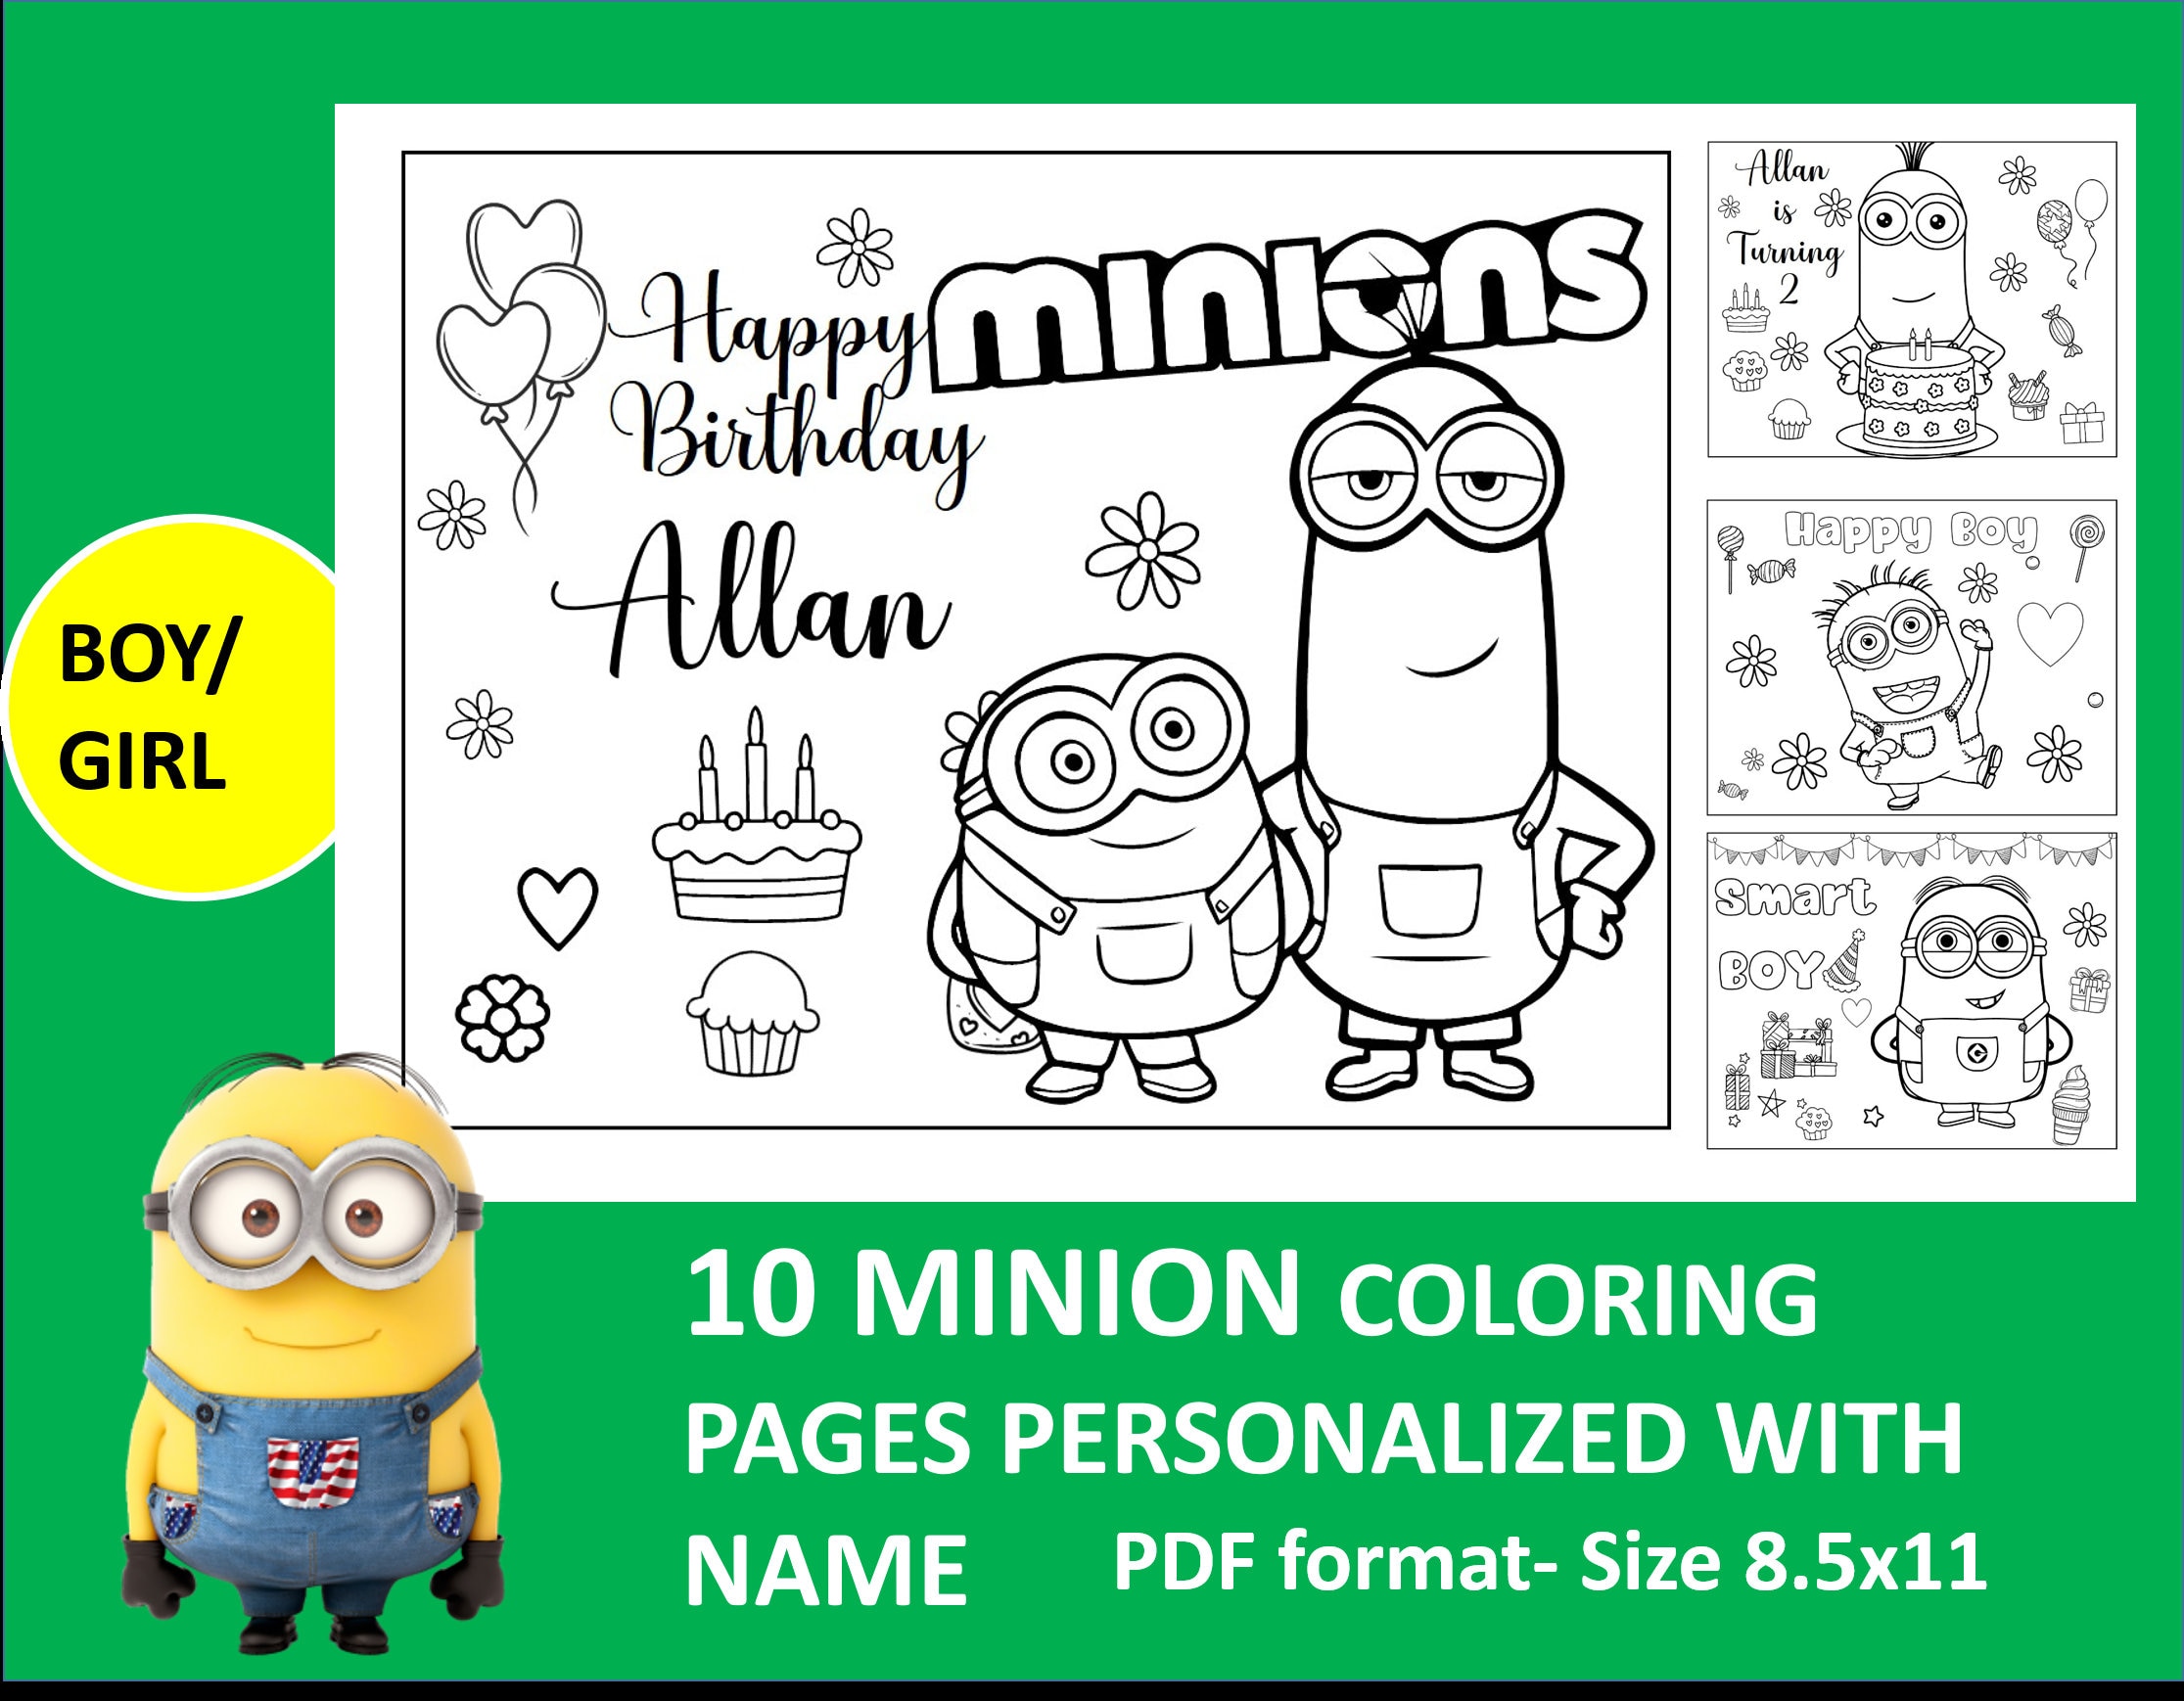 Printable minion coloring page for birthday personalized with name for kids boy girl ages